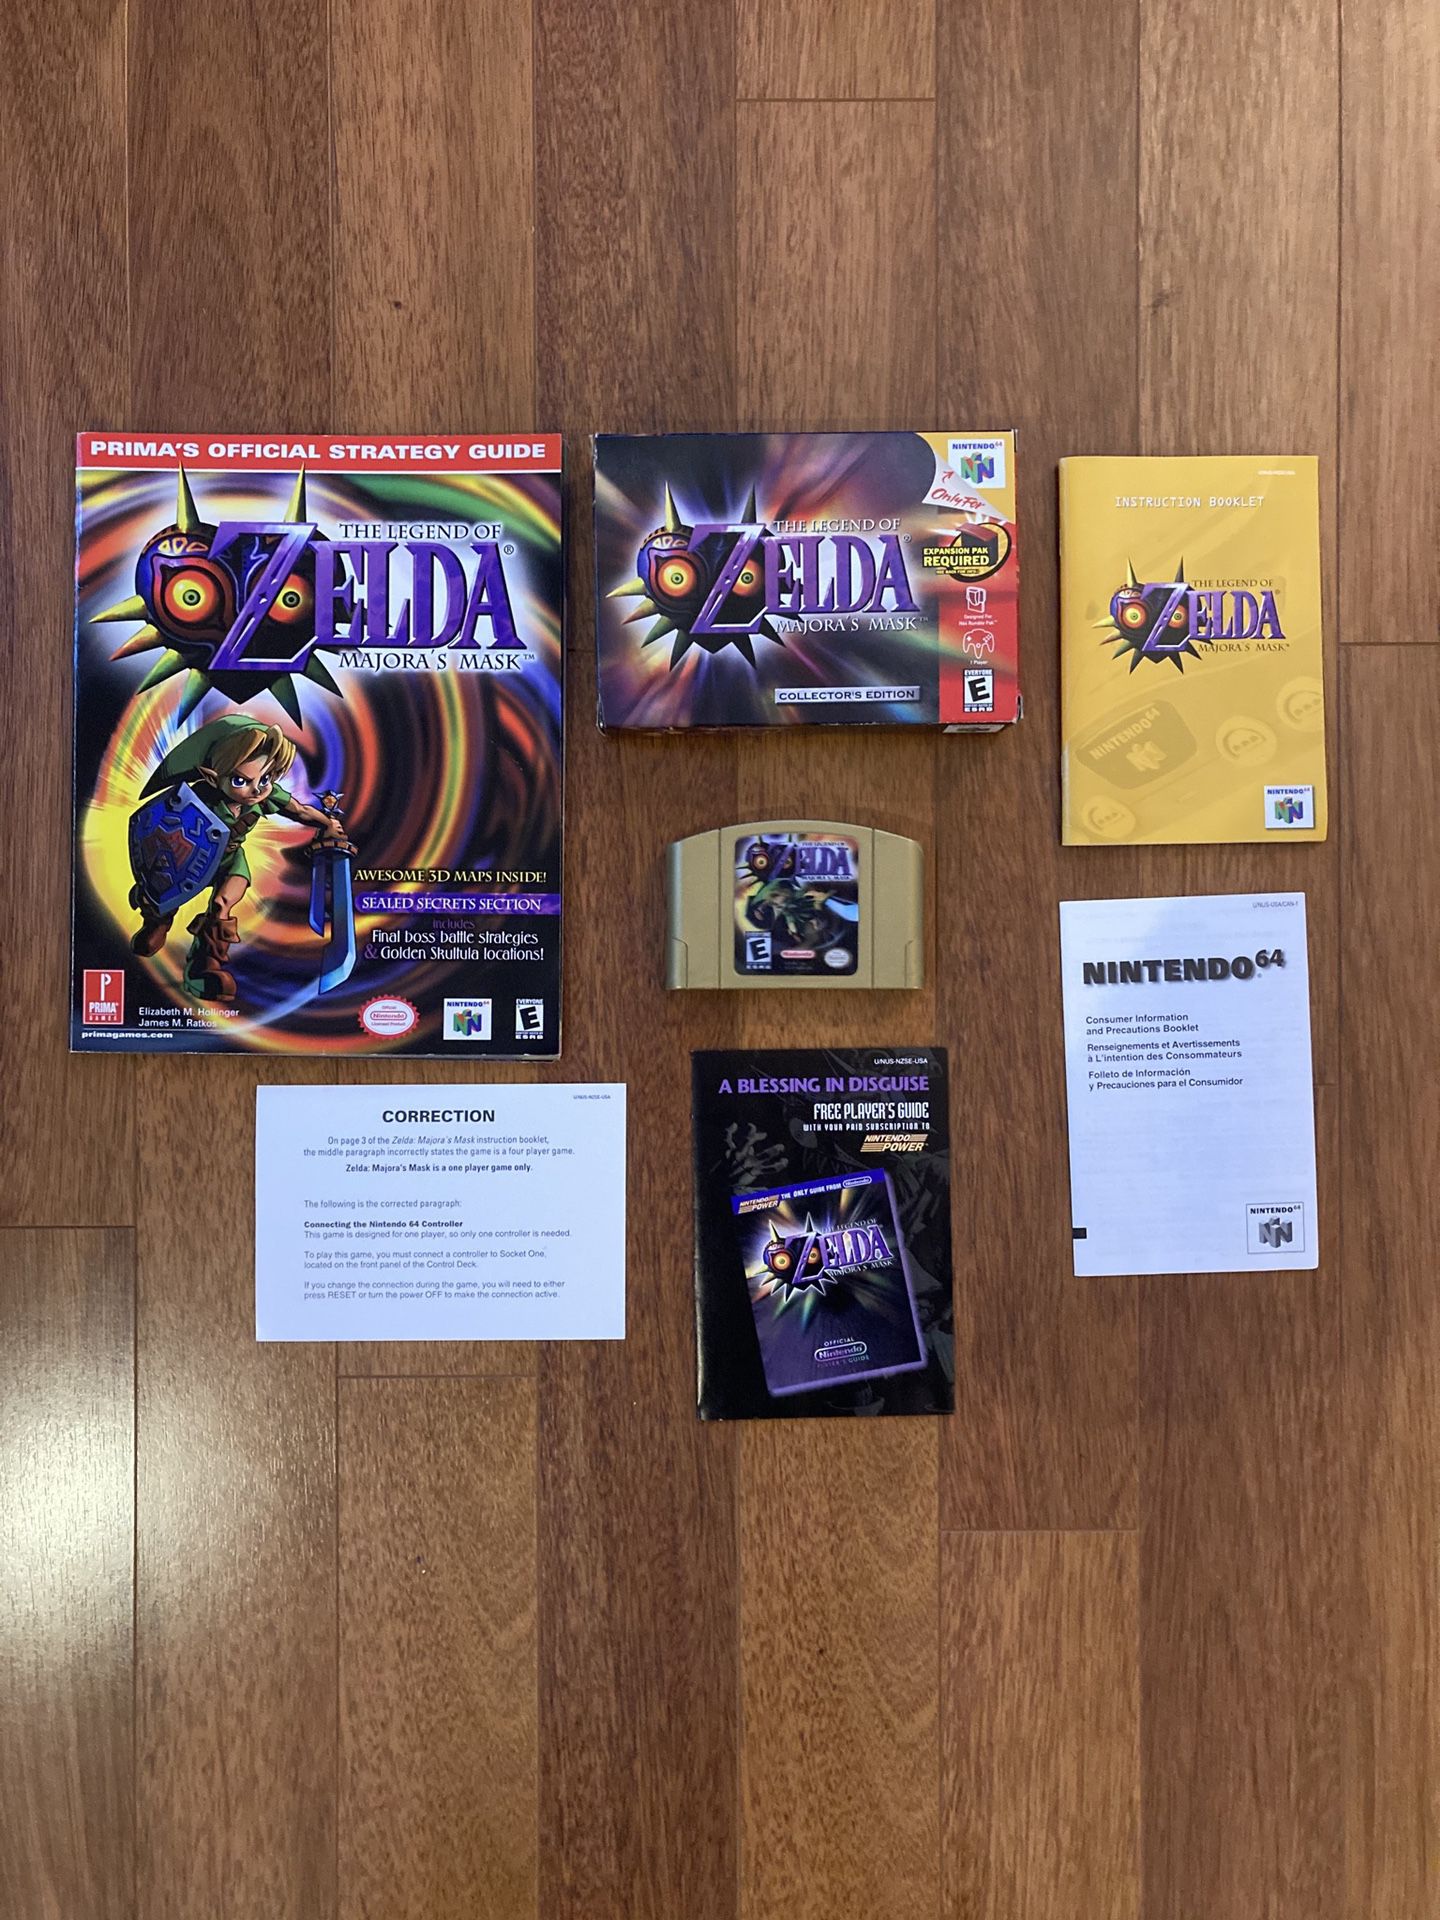 N64 Zelda Majora’s Mask Collectors Edition Complete In Box with Prima’s Official Strategy Guide